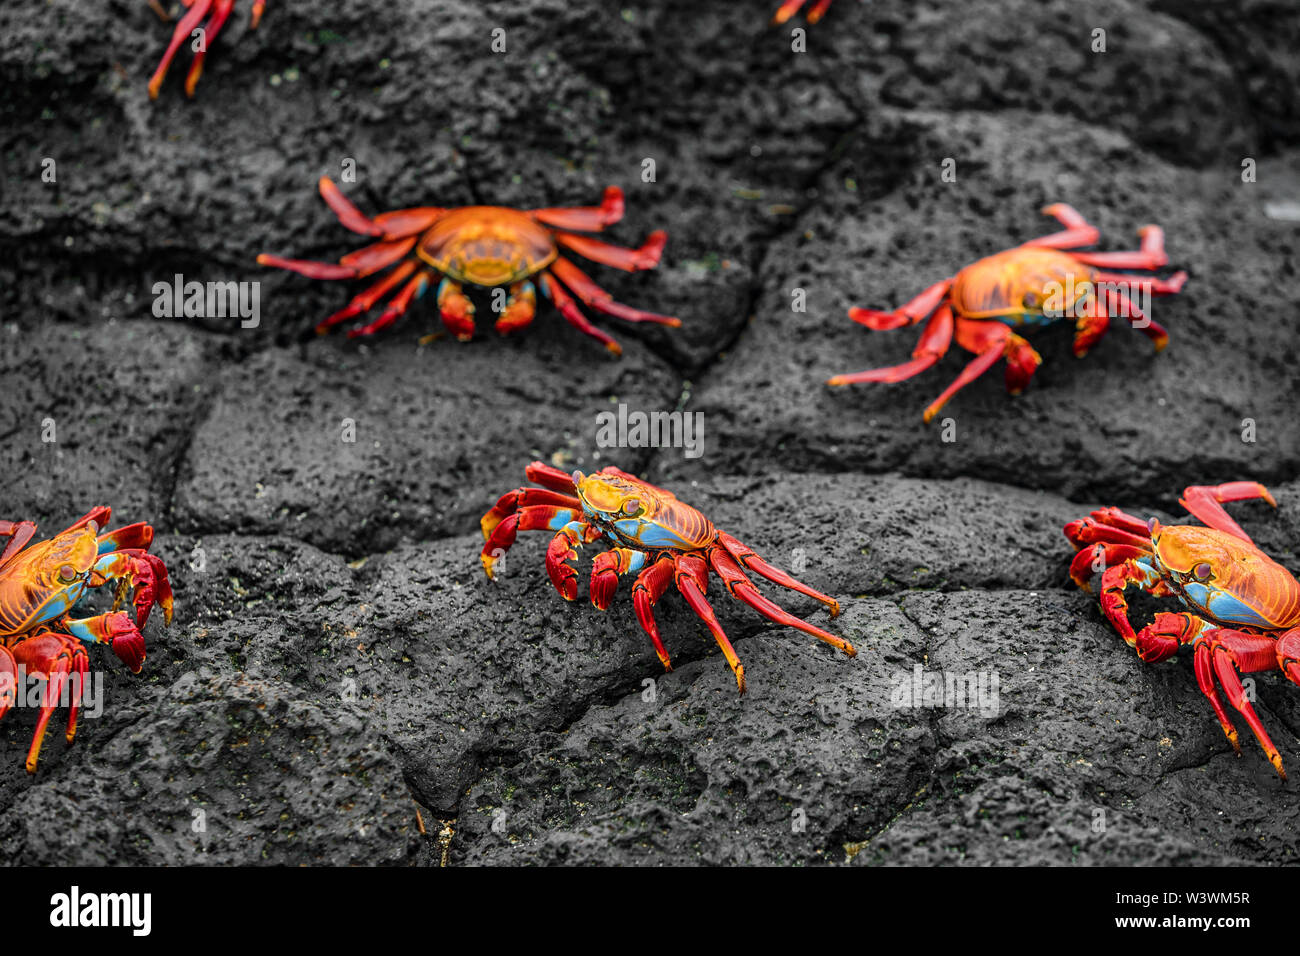 Sally Lightfoot Crabs on Galapagos Islands eating on rock. AKA Graspus Graspus and Red Rock Grab. Wildlife and animals of the Galapagos Islands, Ecuador. Famous iconic animal in Galapagos. Stock Photo